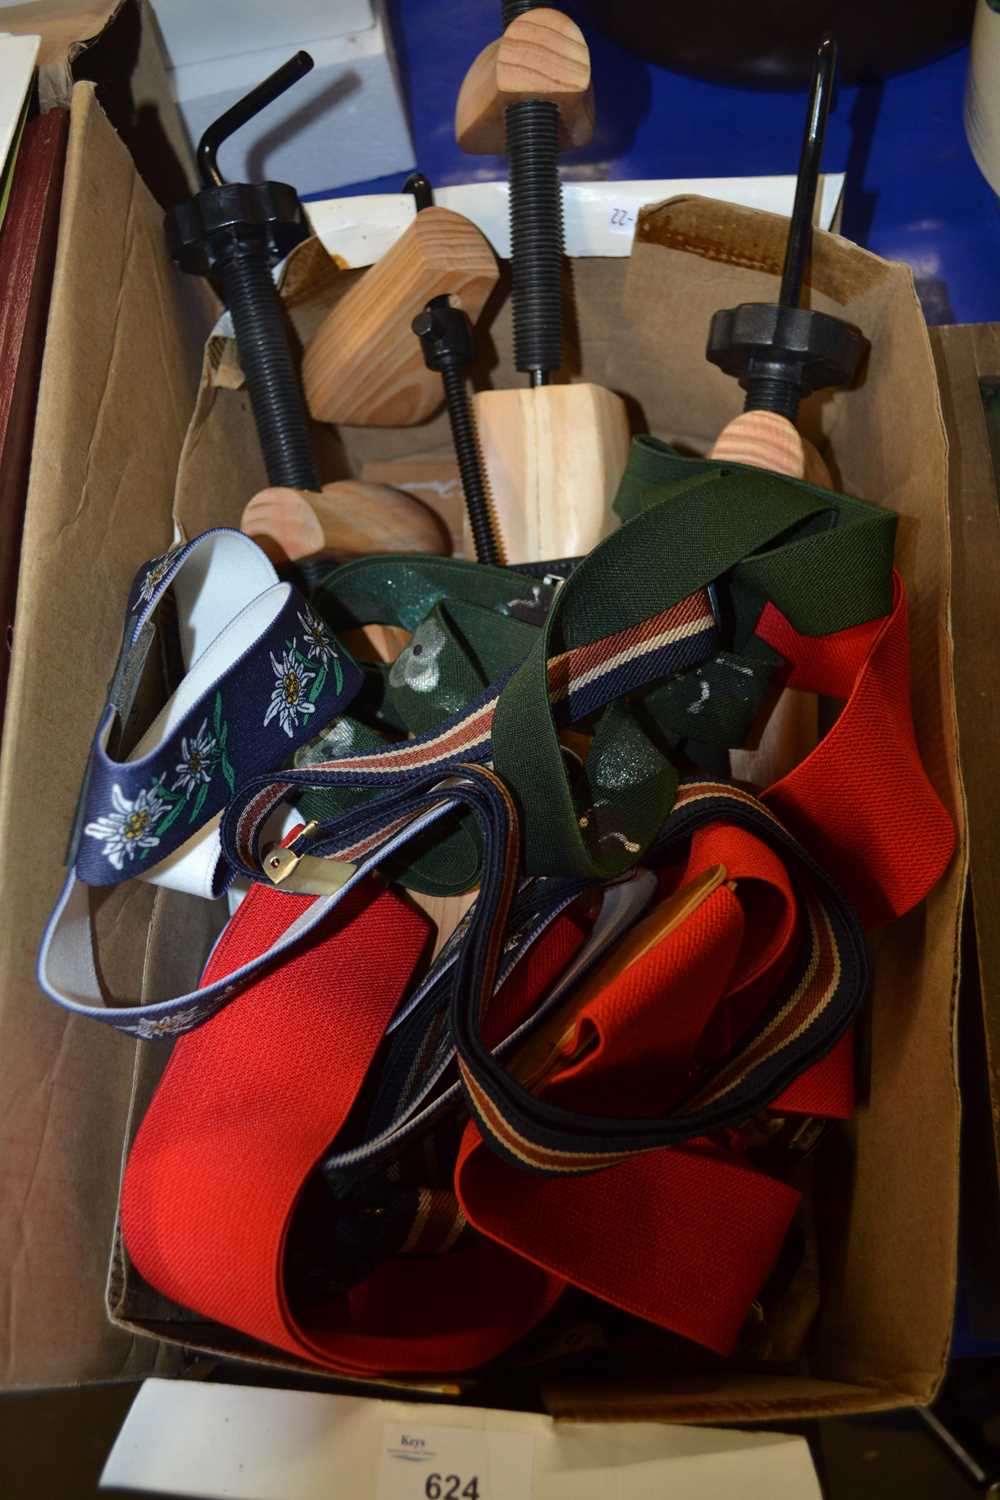 Box of assorted sized shoe trees and gentlemans braces